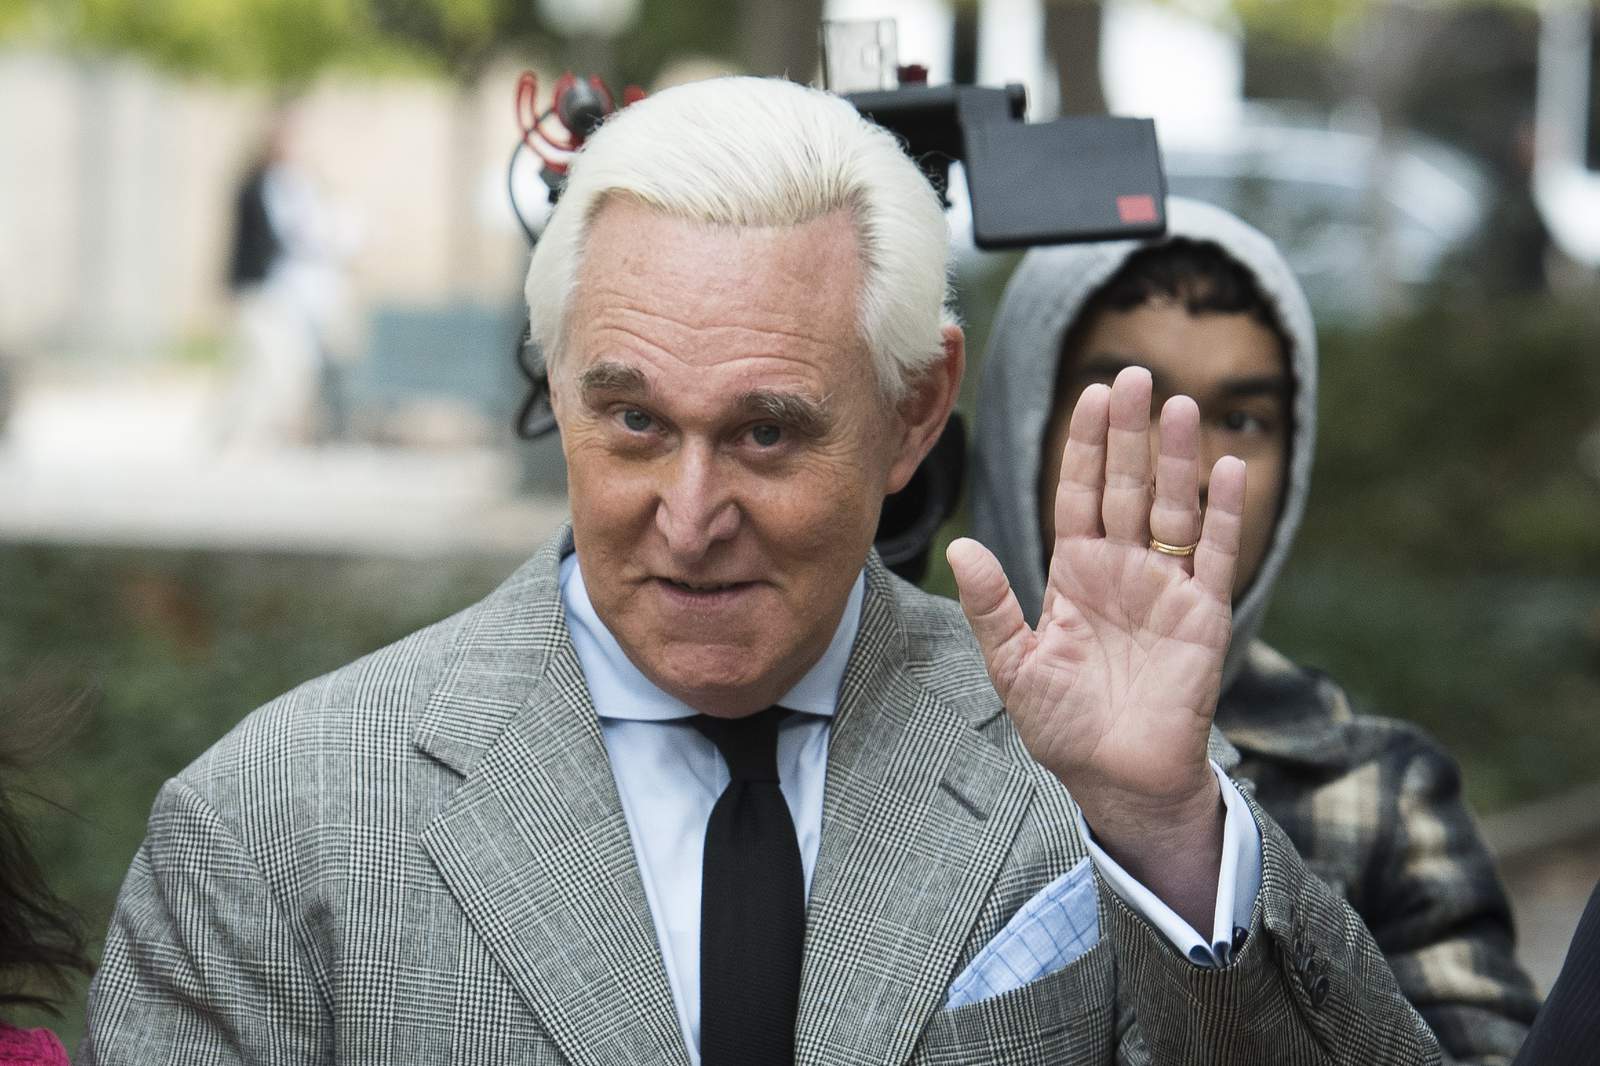 Facebook takes down accounts tied to Roger Stone